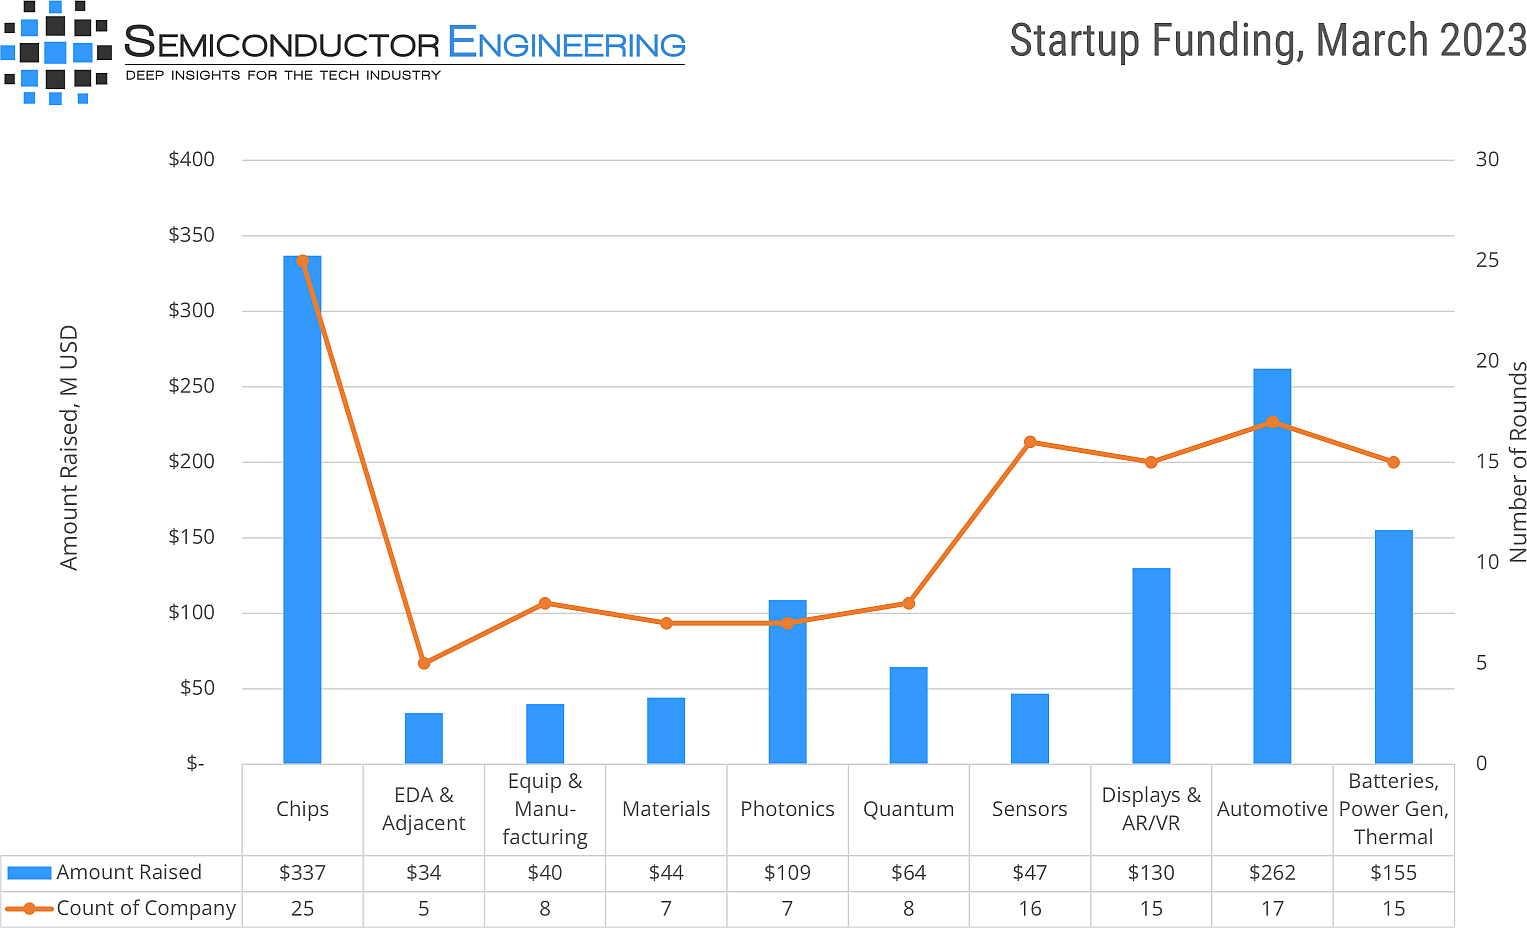 Startup Funding: March 2023